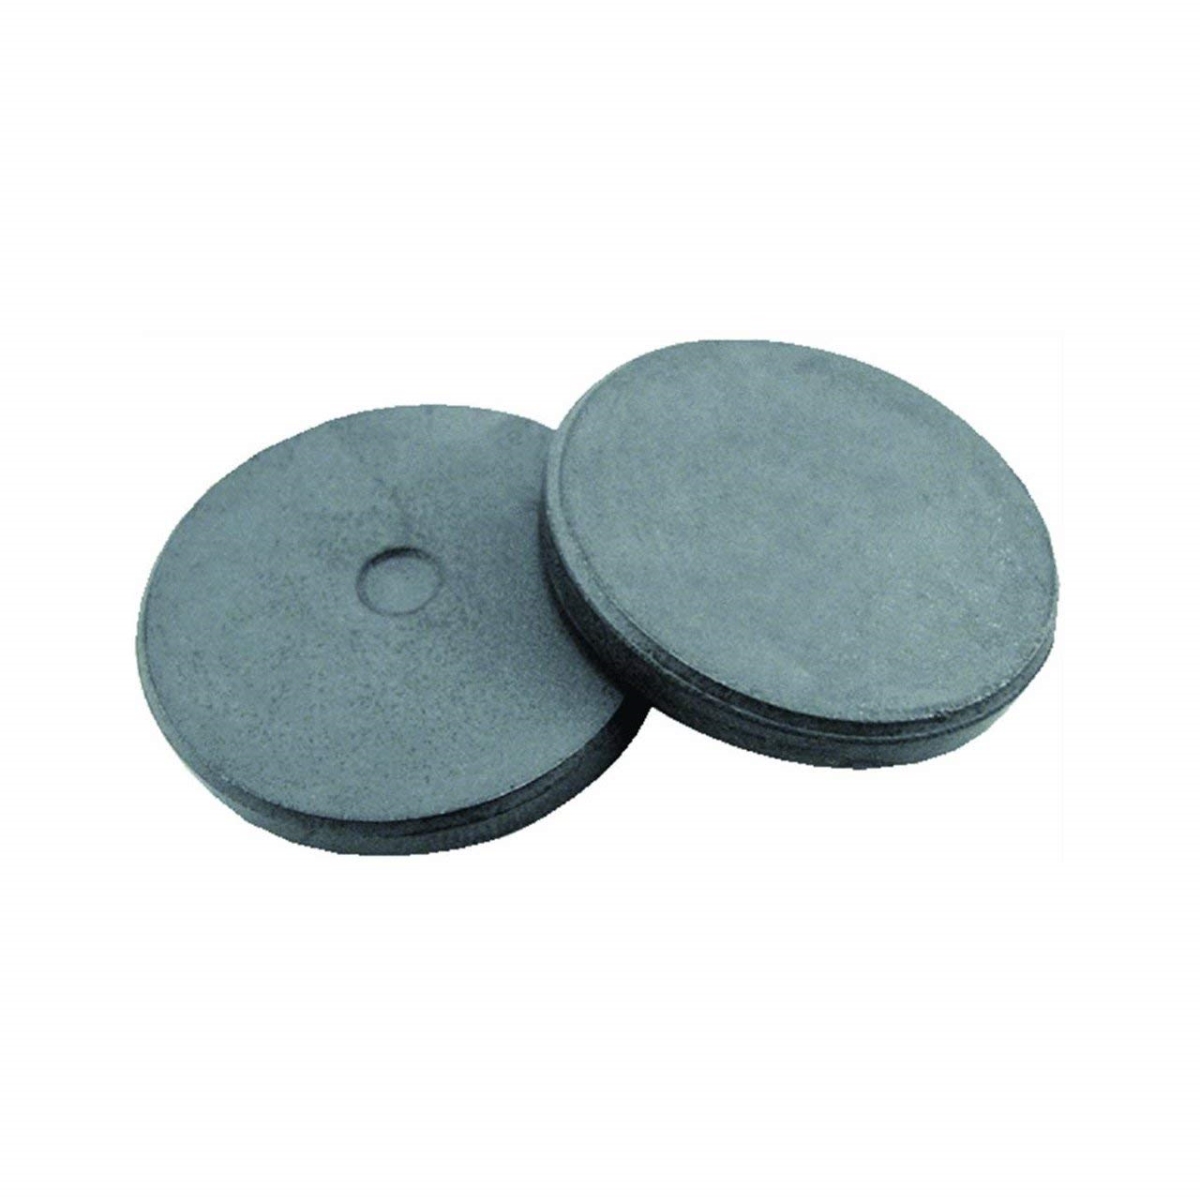 07041 1.5 In. Magnet Disc, 2 Count